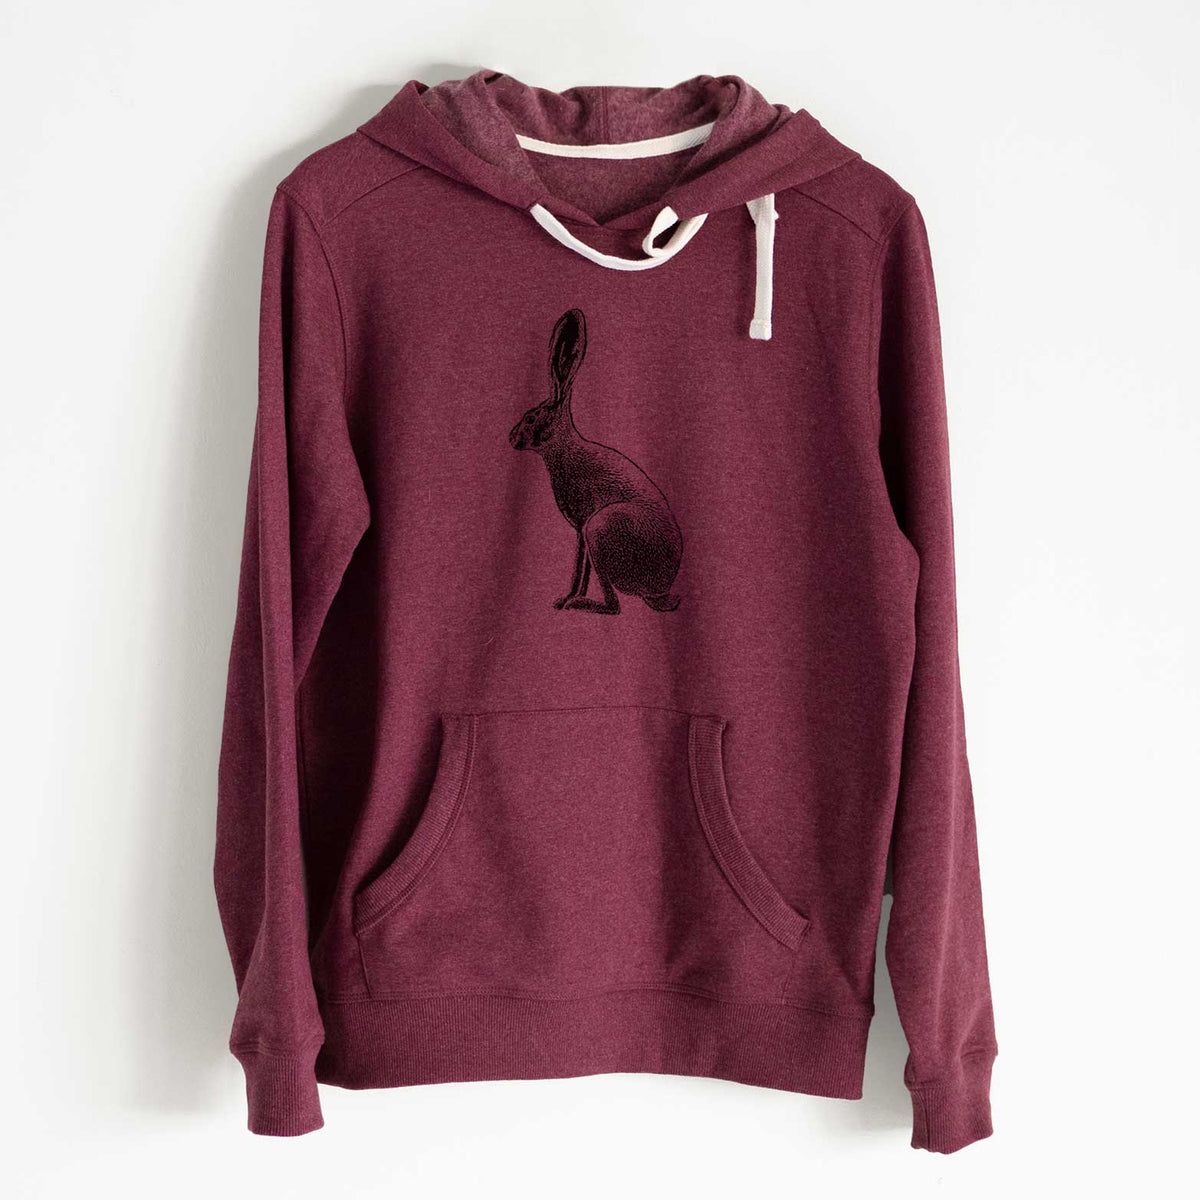 Wild California Hare - Black-tailed Jackrabbit - Unisex Recycled Hoodie - CLOSEOUT - FINAL SALE